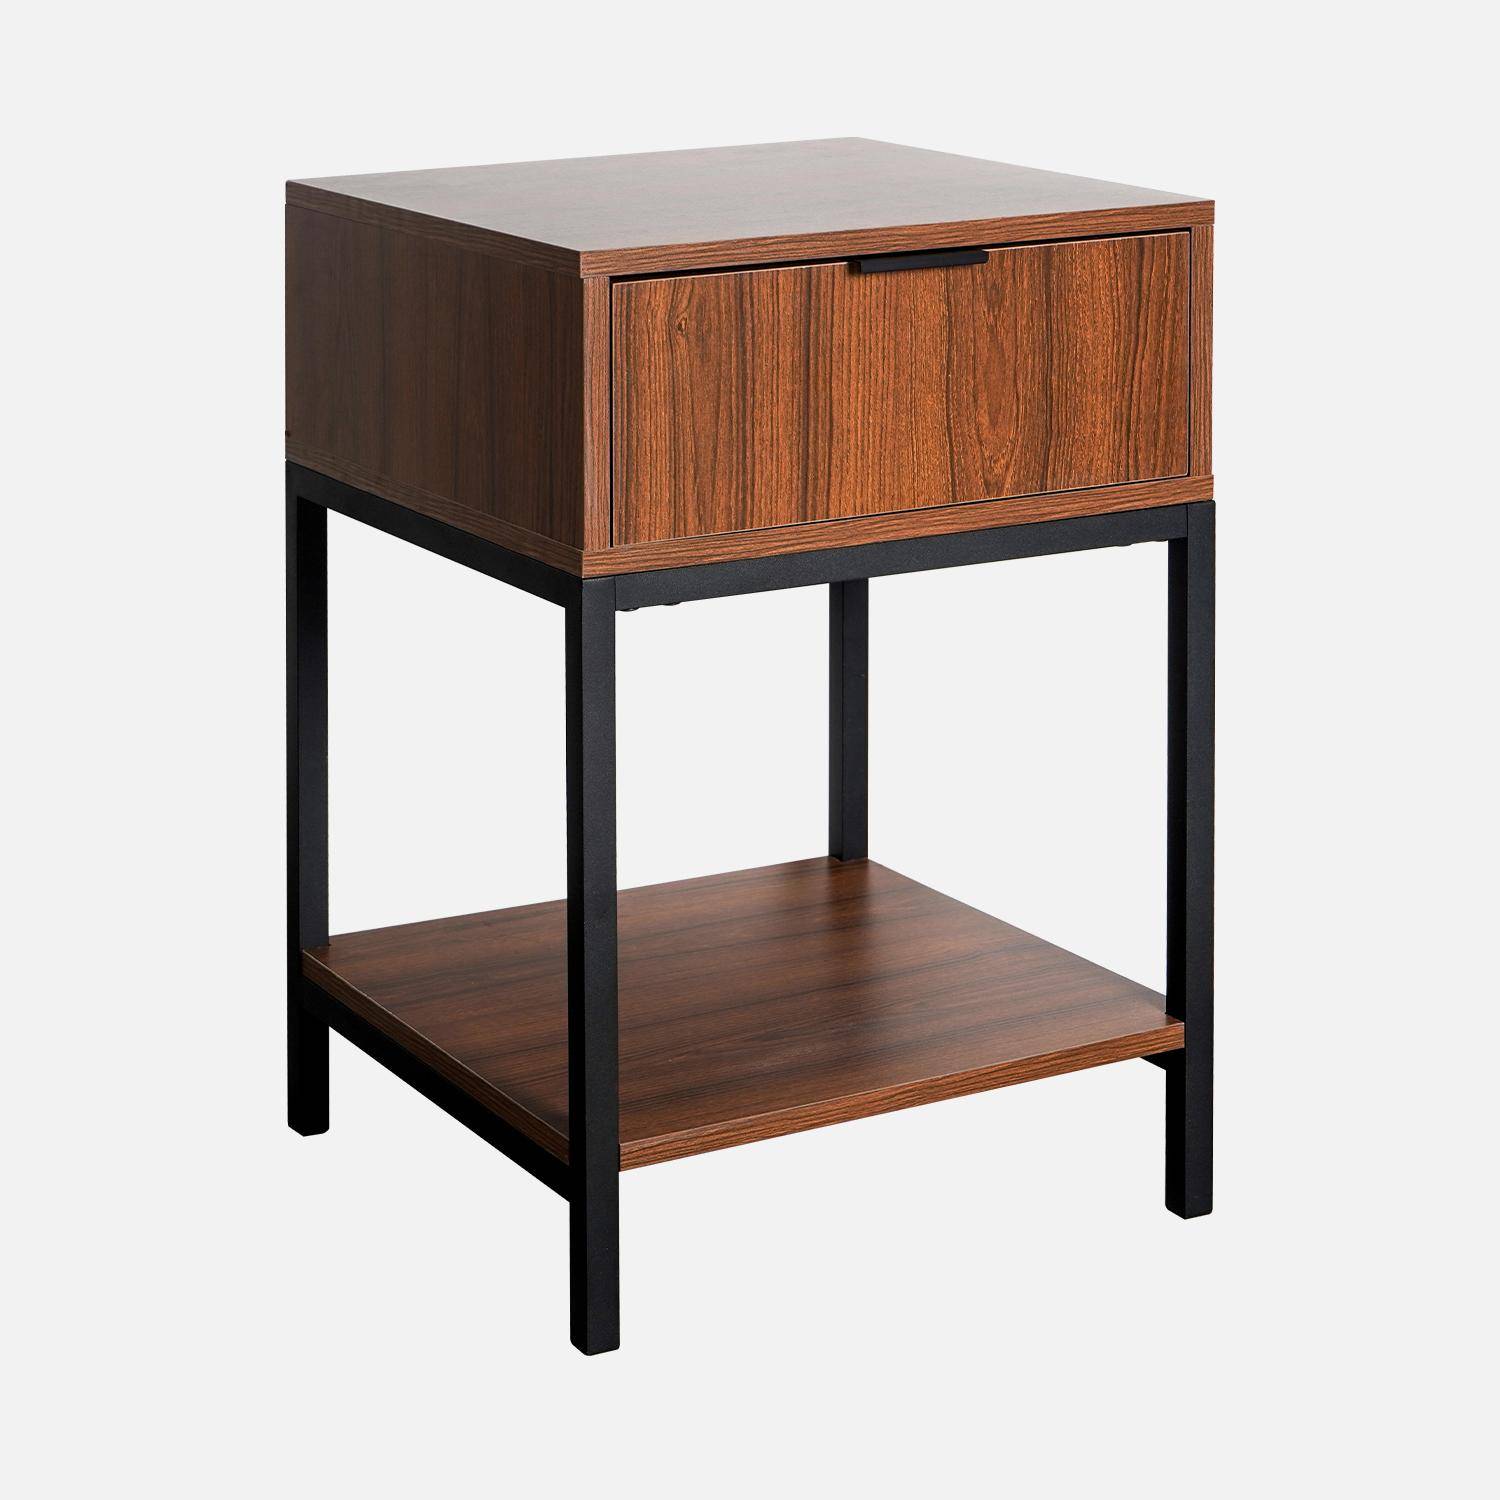 Walnut-coloured bedside table with black metal legs and handle - 1 drawer and 1 shelf,sweeek,Photo2